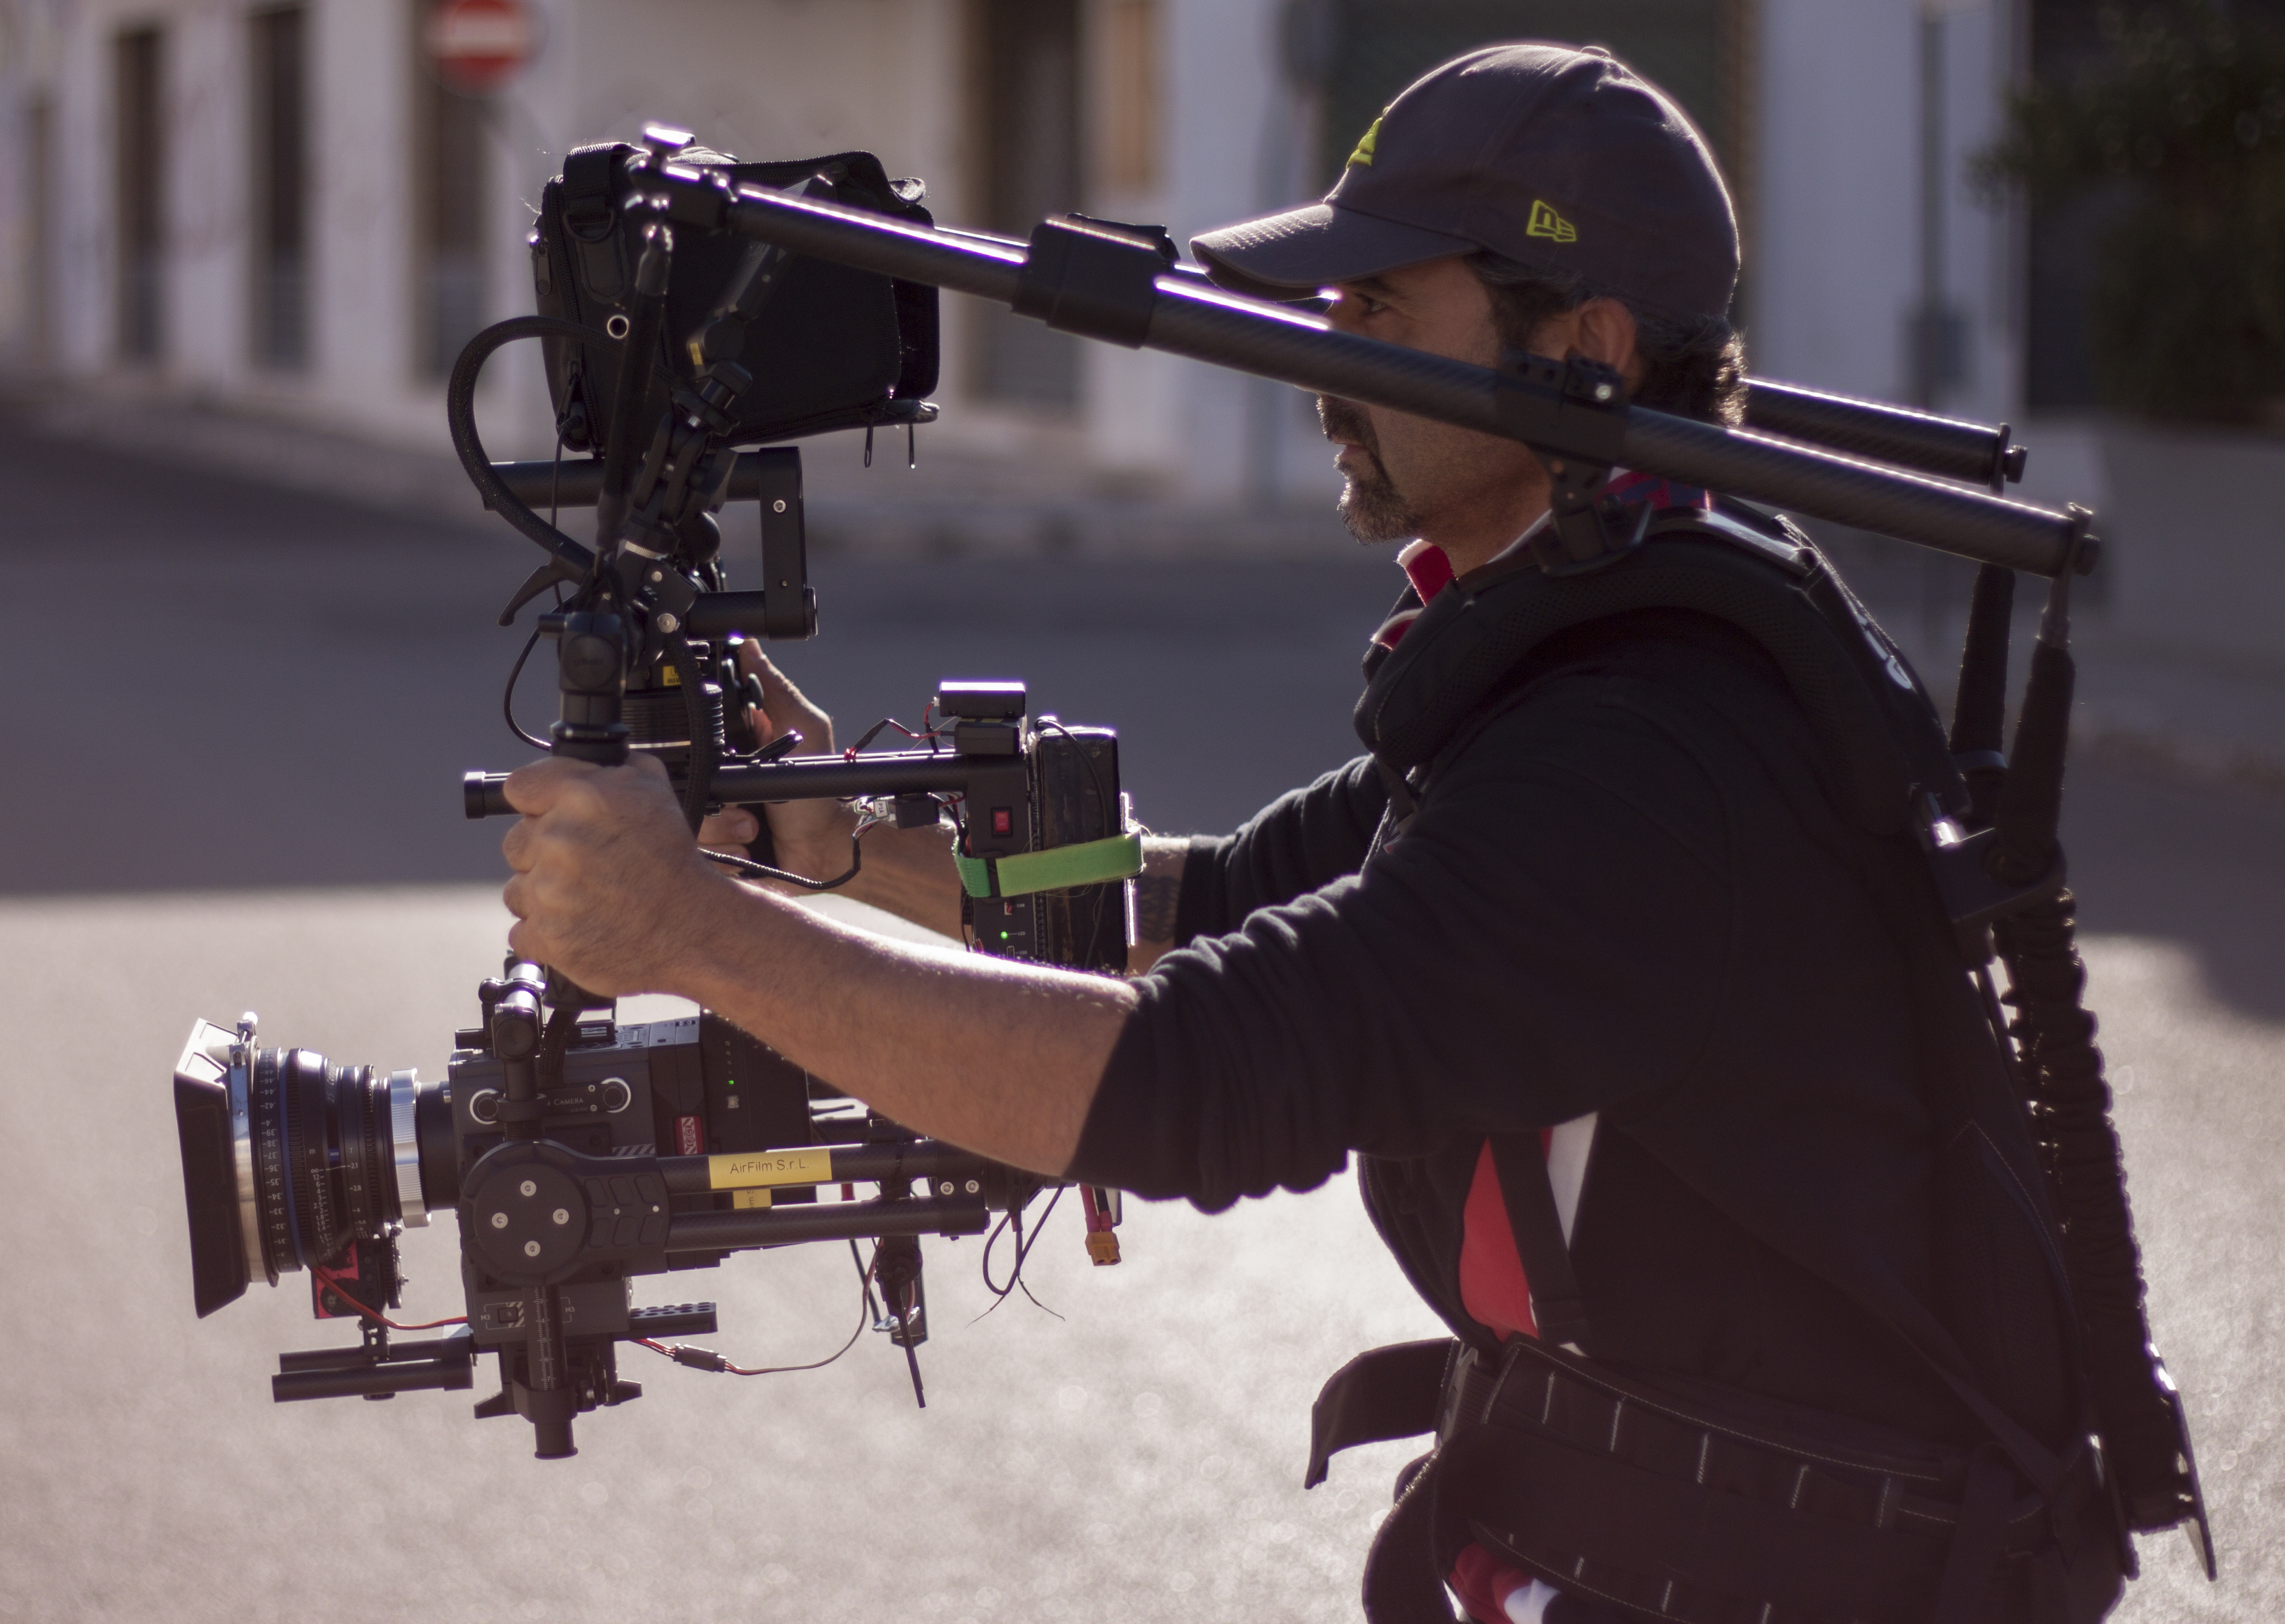 RED Dragon e Ready Rig con gimbal 3 assi